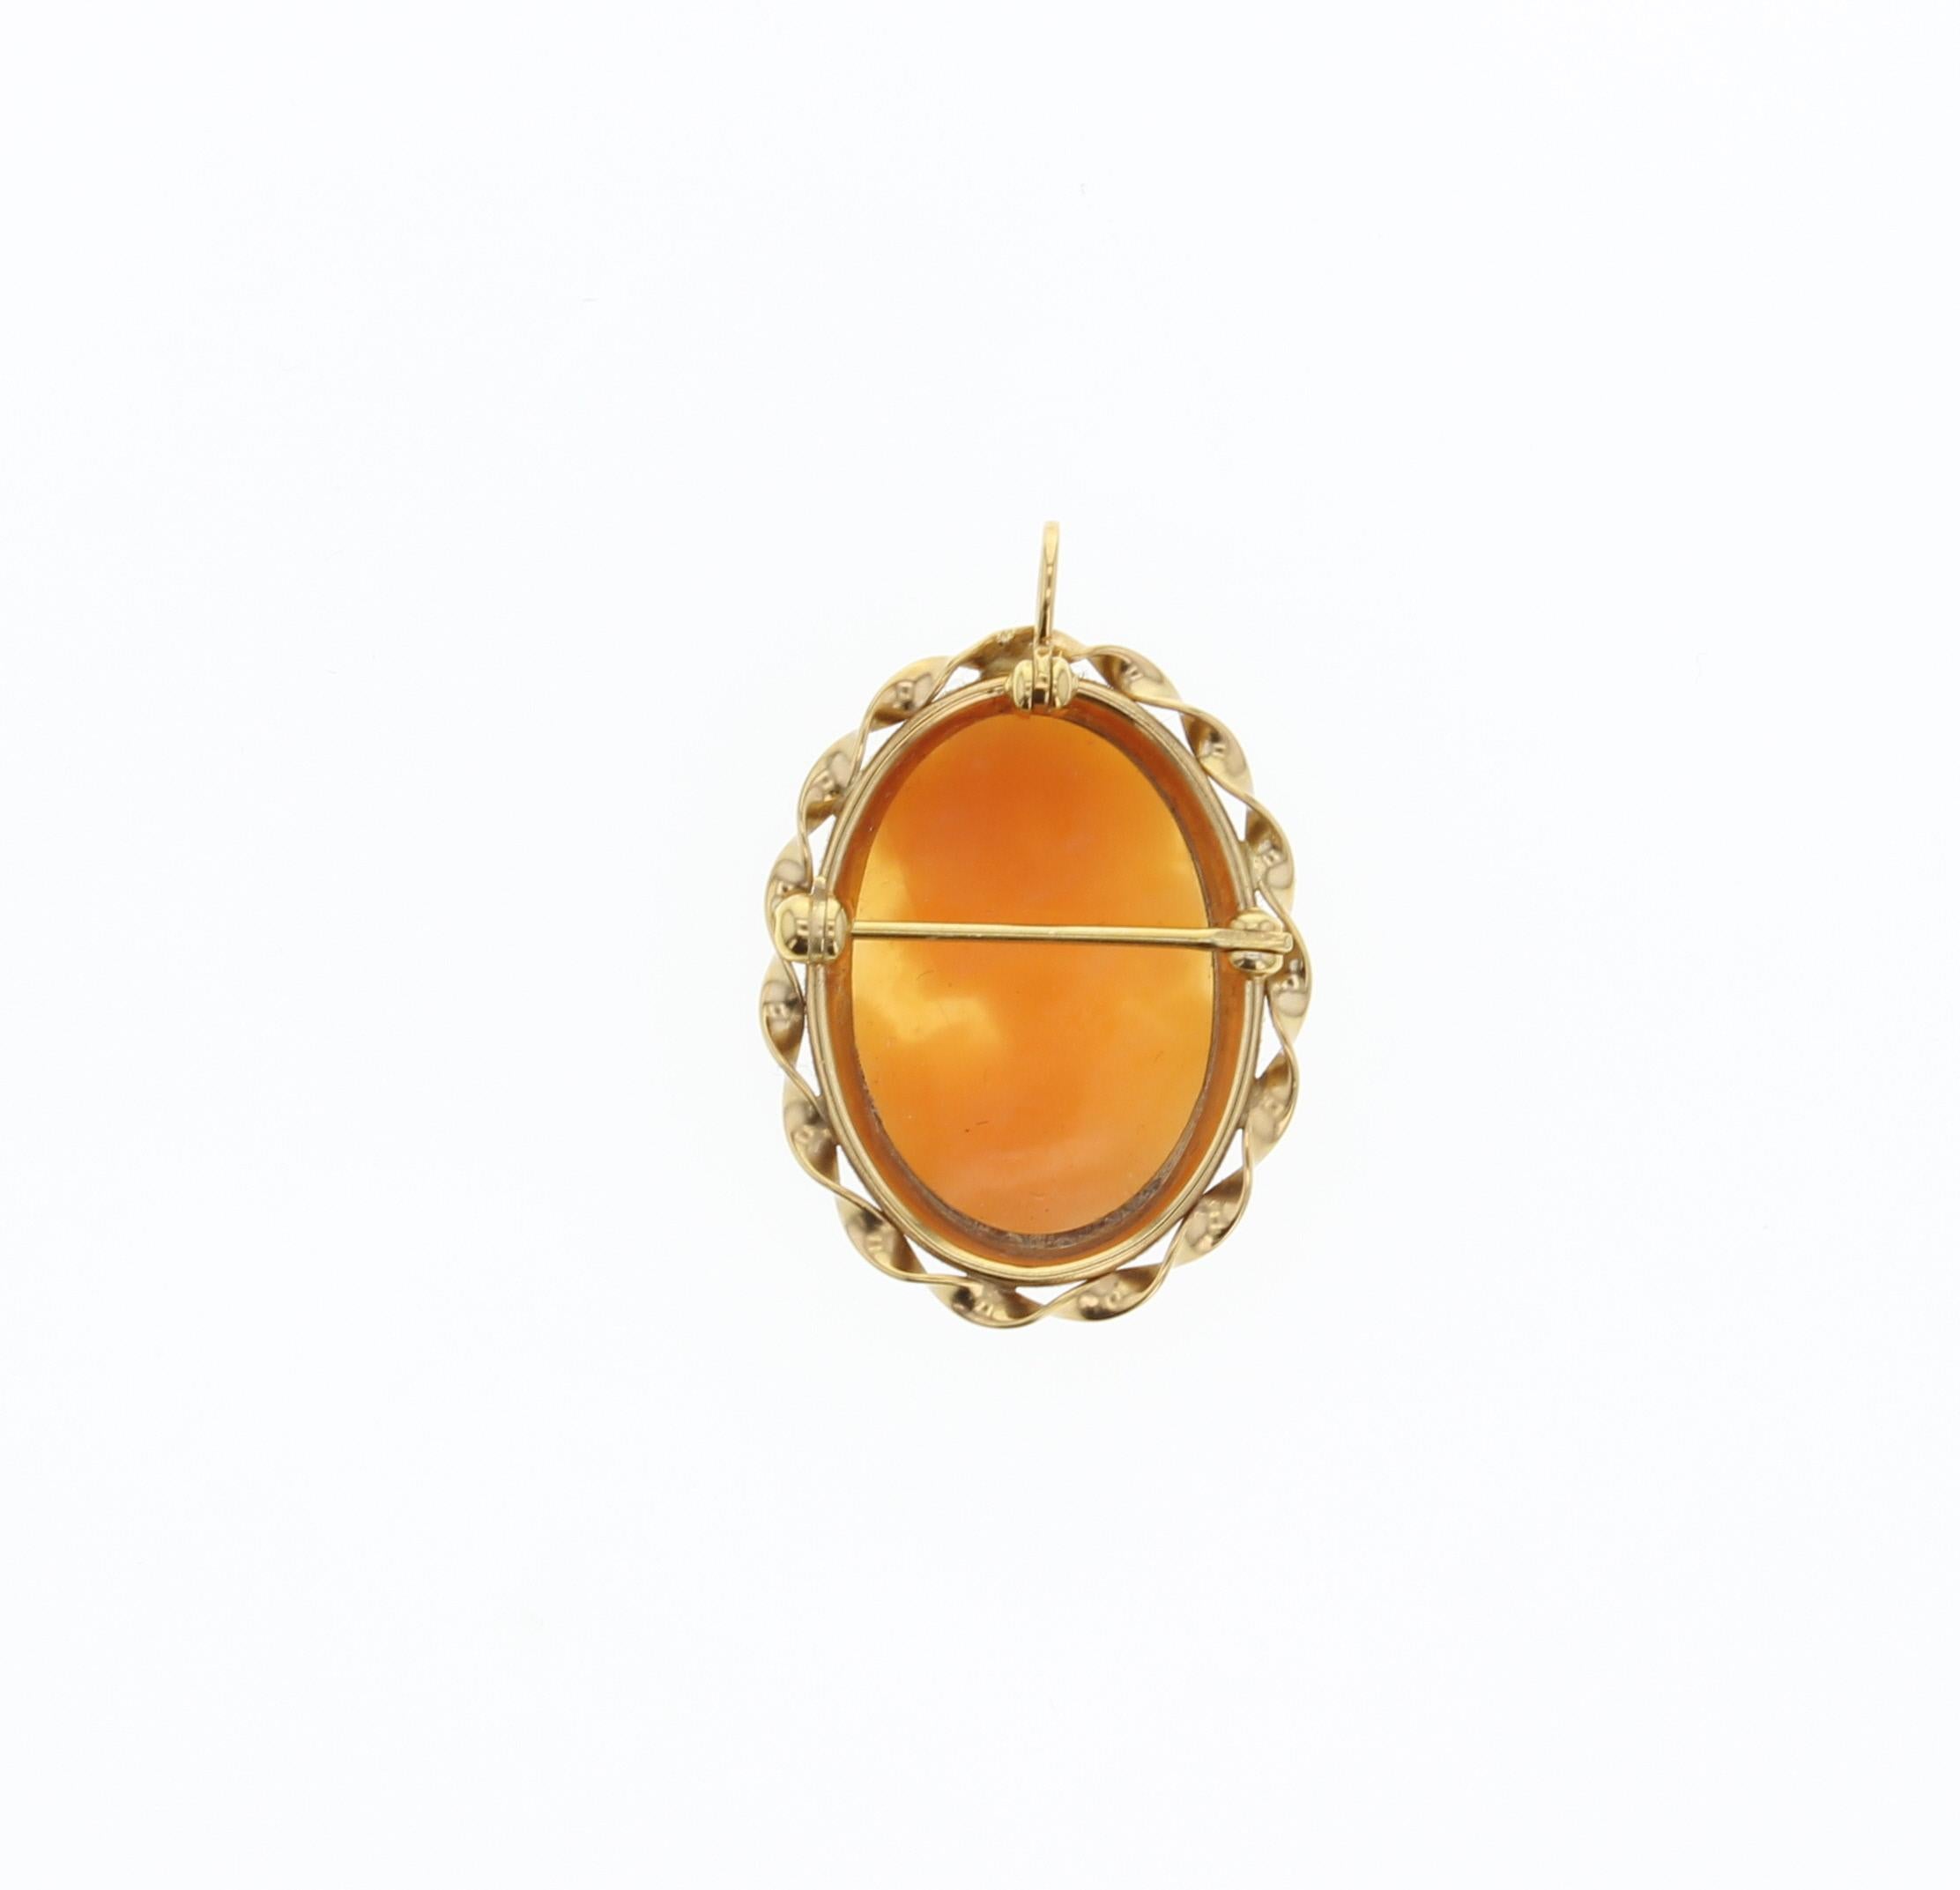 Shell Cameo Brooch Pendant with Oval Gold Tone Frame In New Condition For Sale In Sugar Land, TX